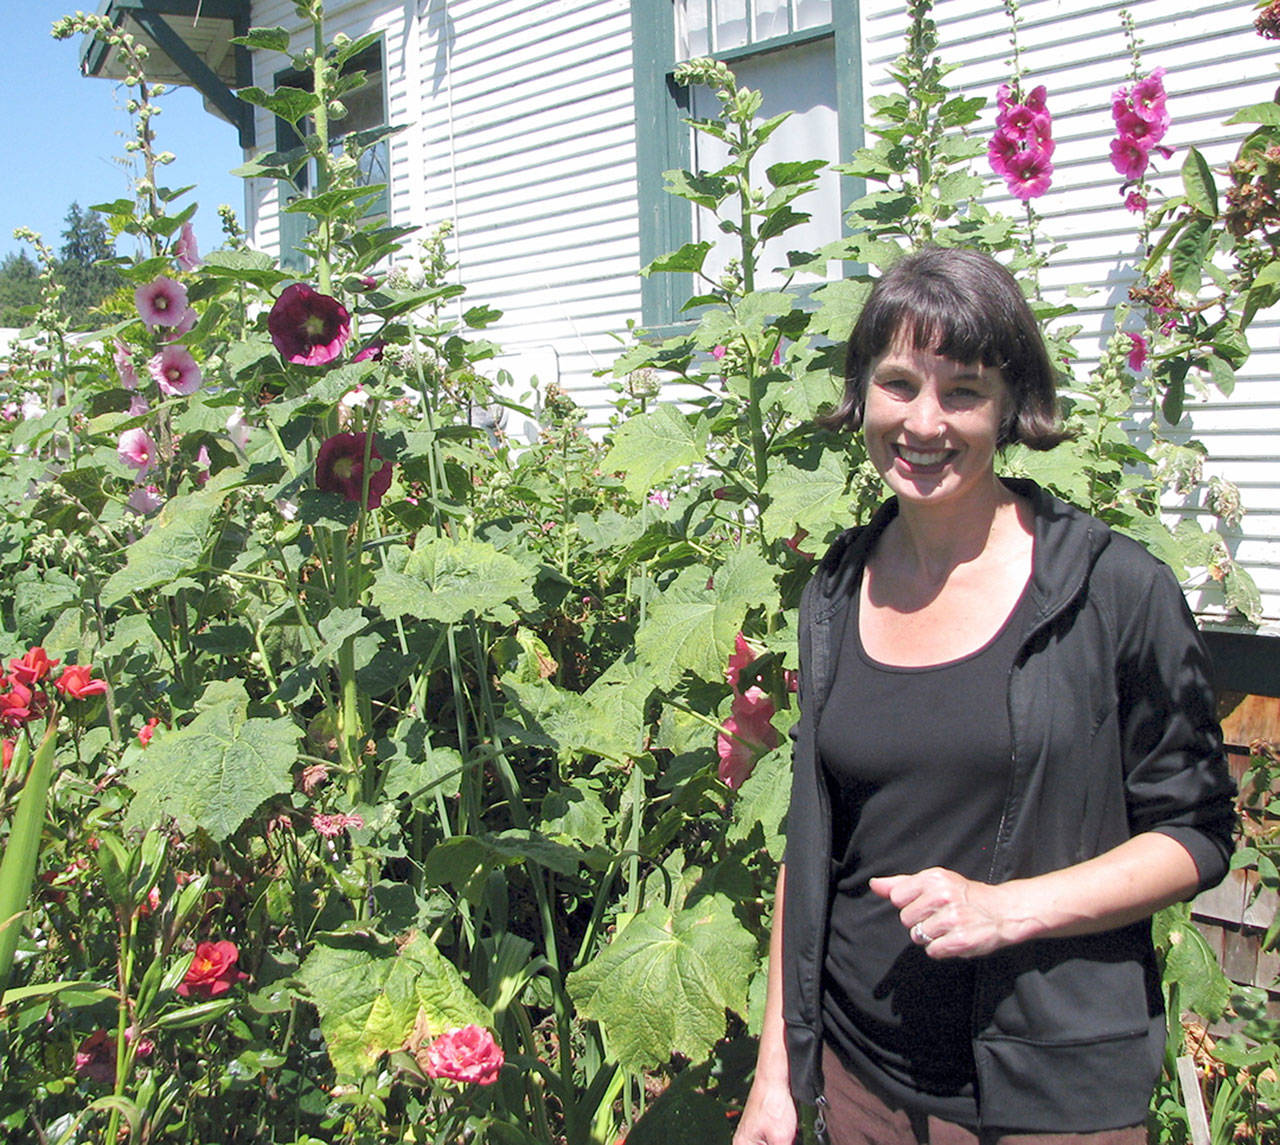 Dirt Rich Farms “Director of Dirt” Kateen Fitzgerald will present “Working with the Weeds” at noon Thursday, Aug. 10, in Port Angeles. This presentation is sponsored by the WSU Clallam County Master Gardeners. (Amanda Rosenberg)